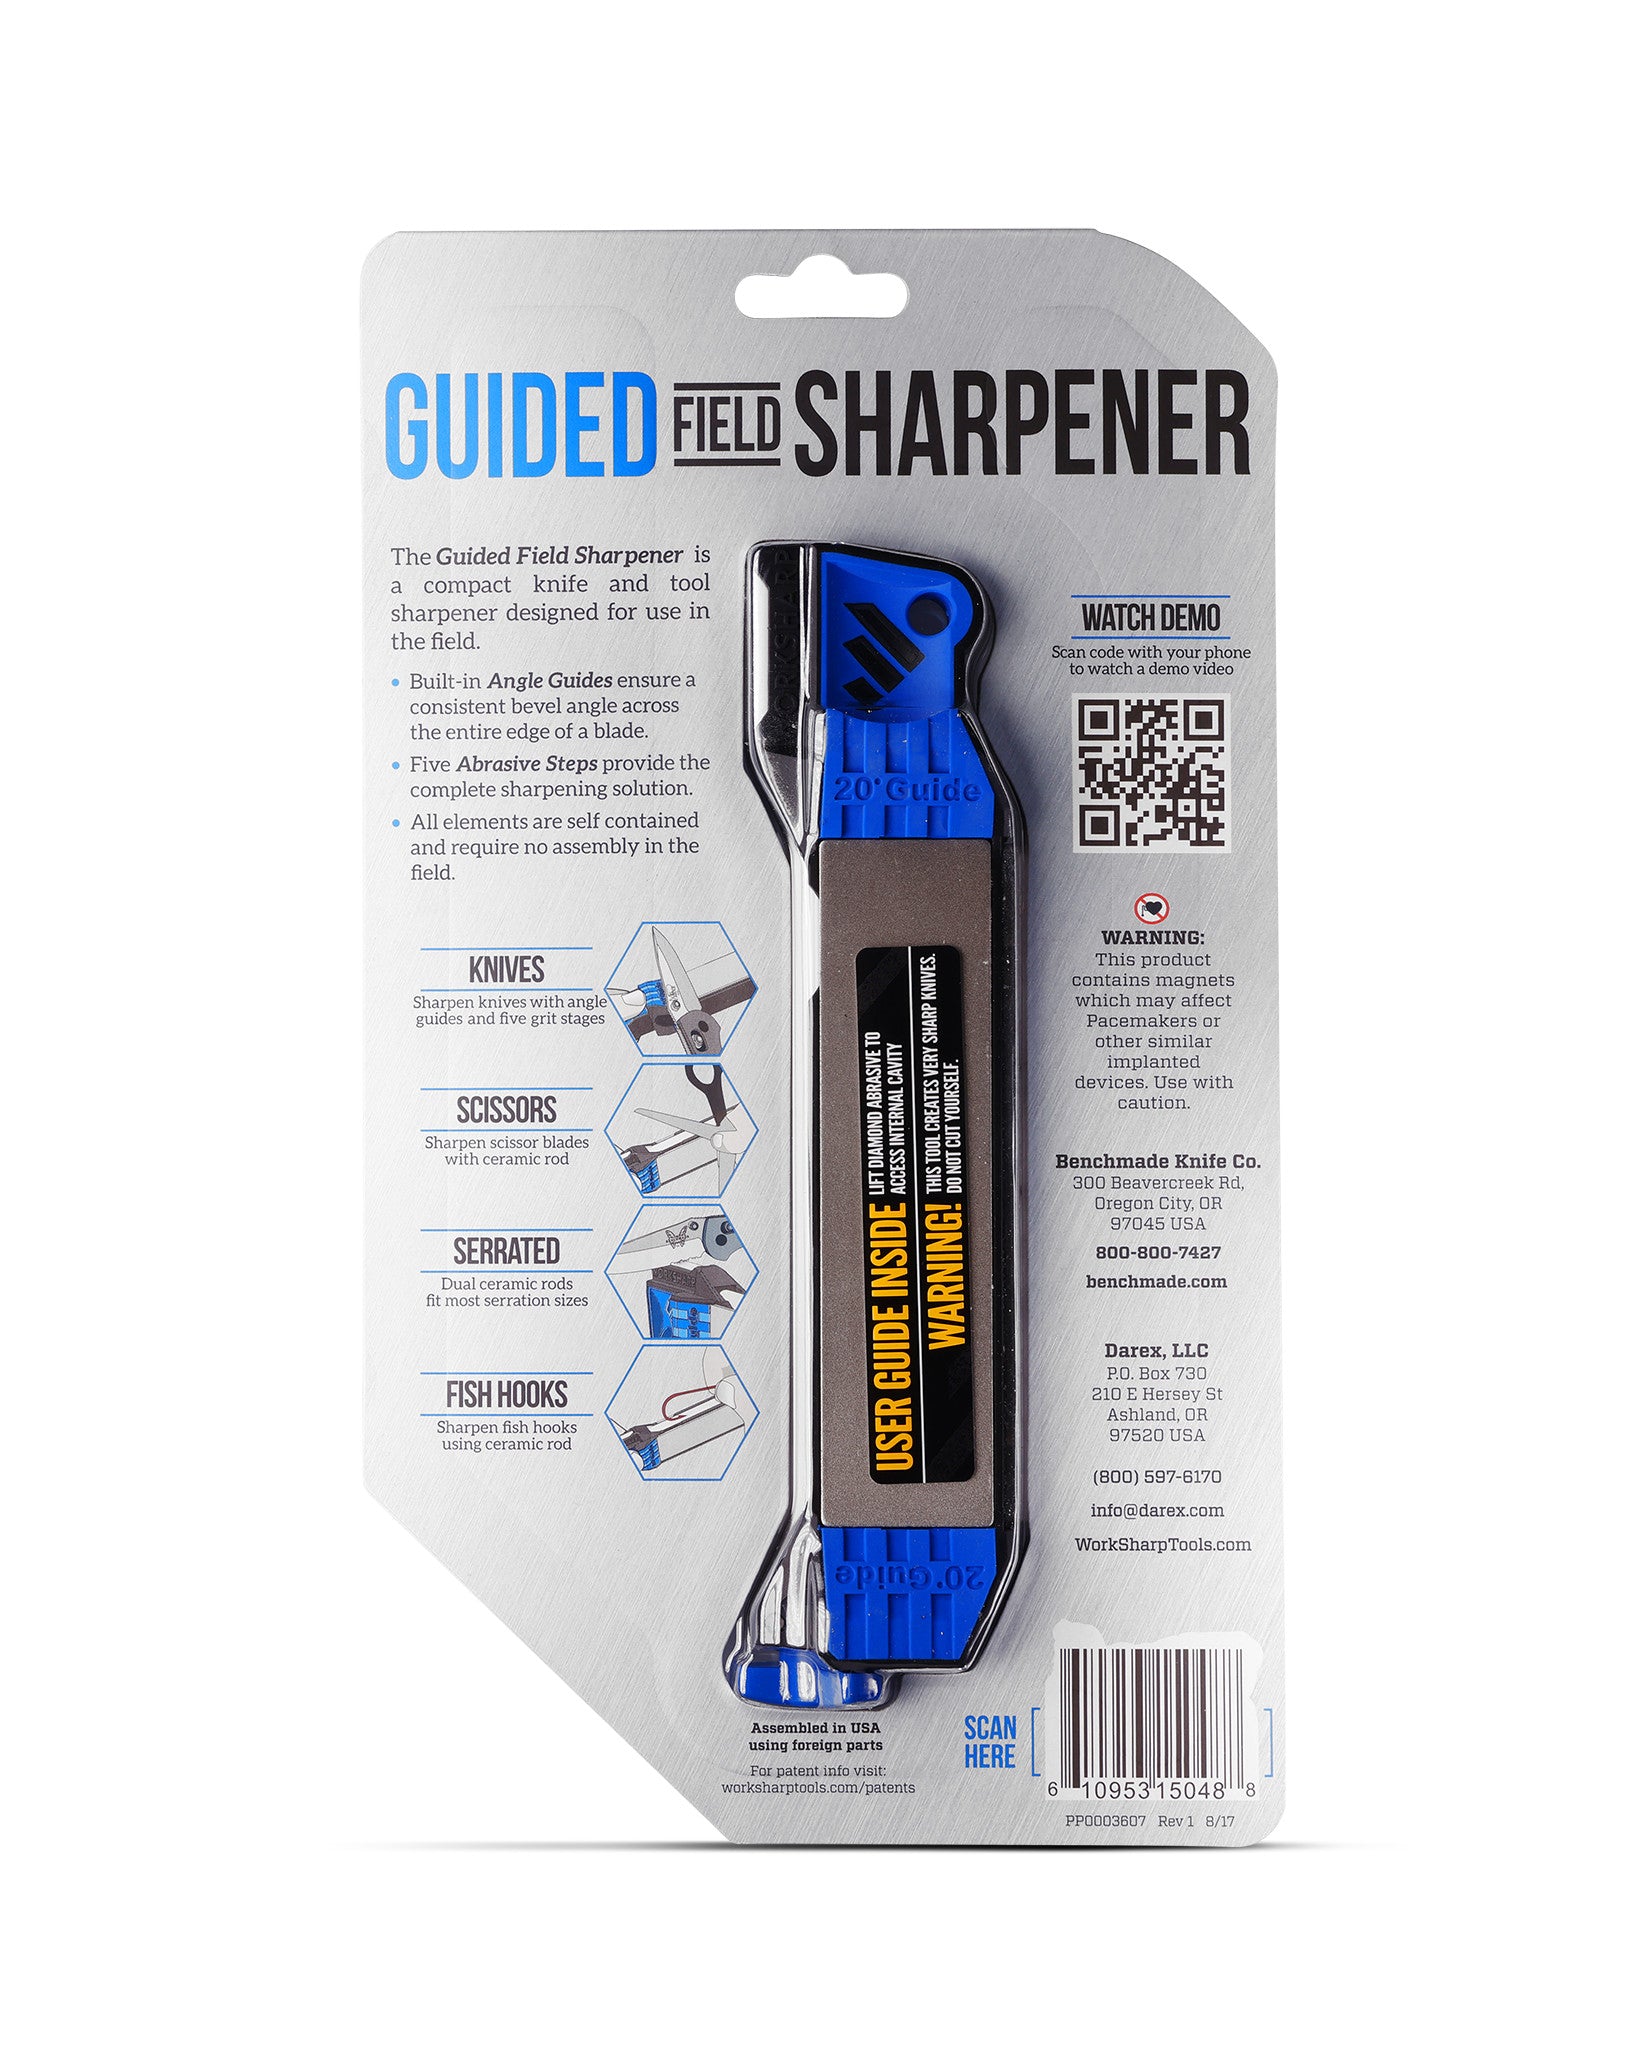 High-Performance Guided Field Sharpener | Benchmade